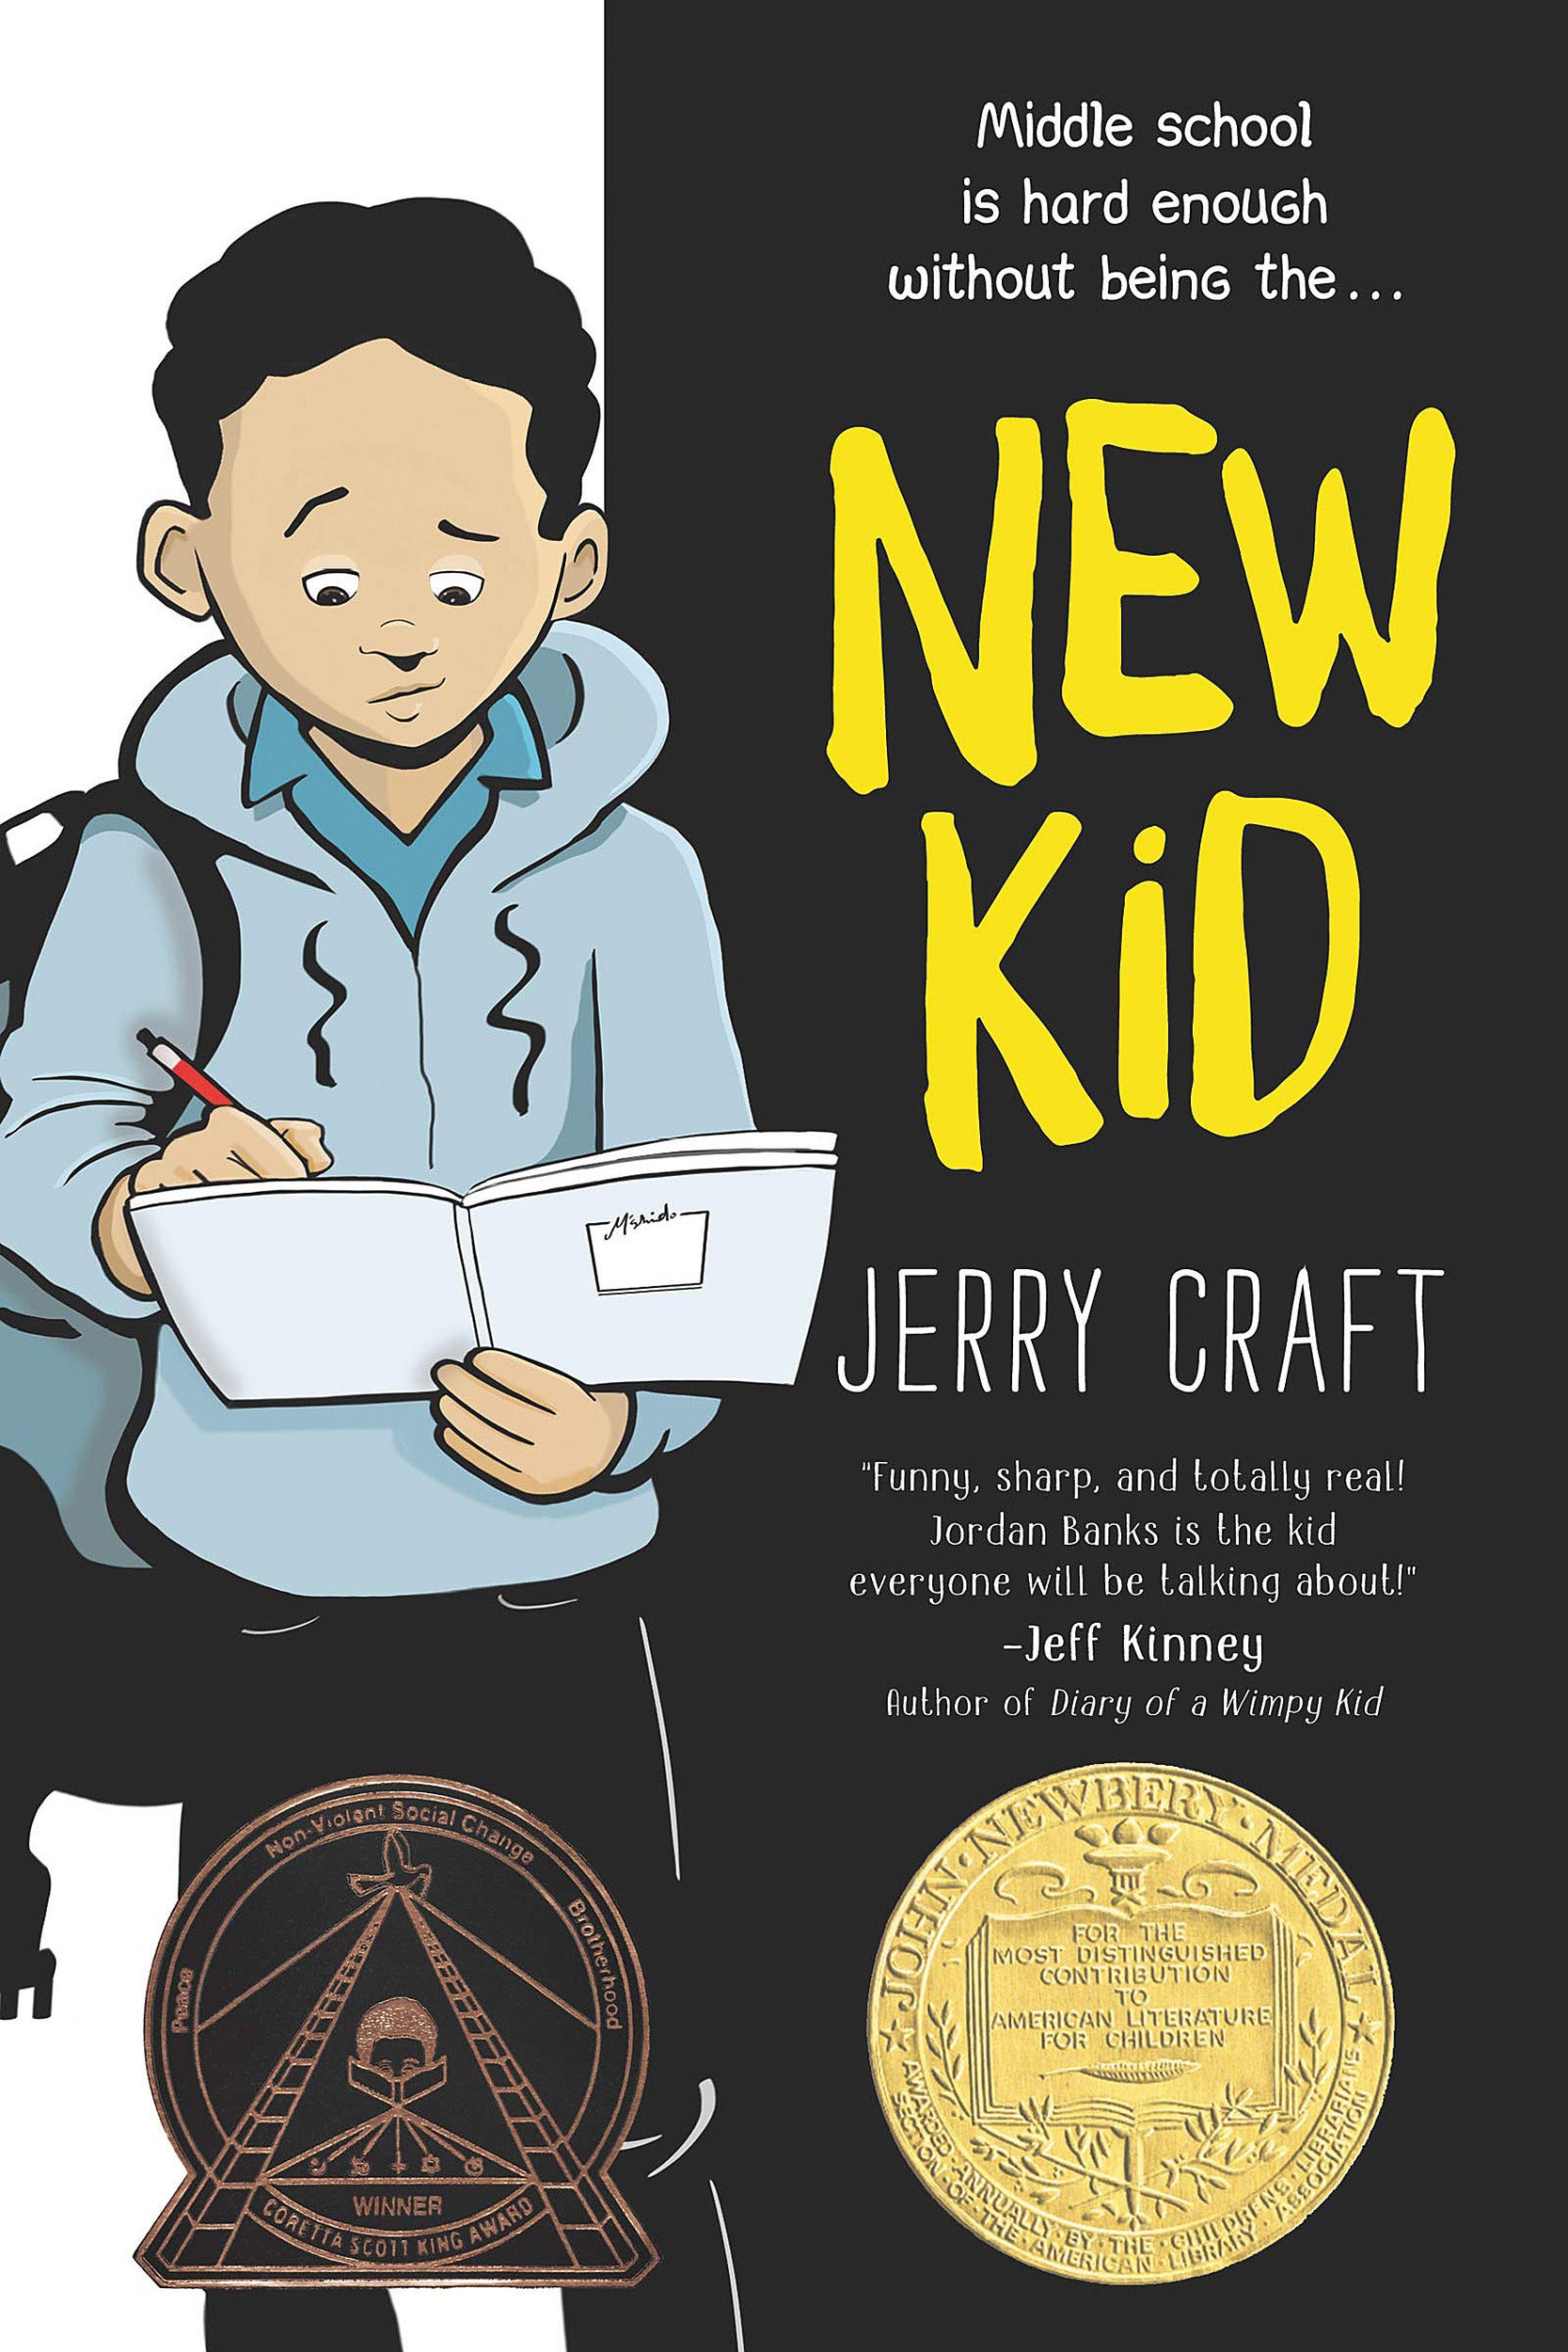 Cover of “New Kid” by Jerry Craft.